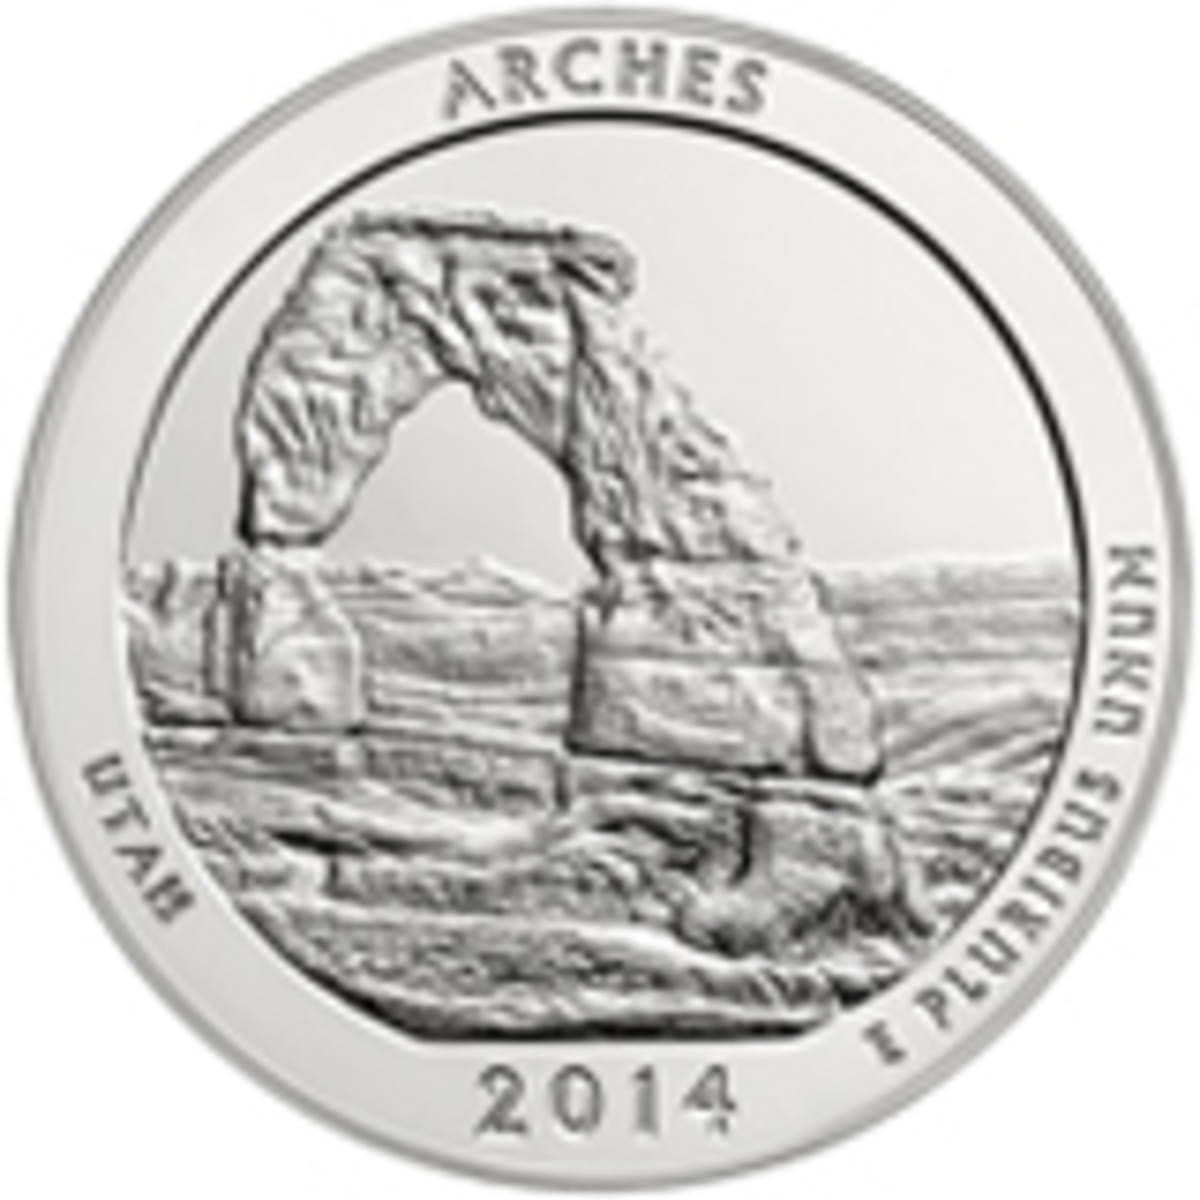 Demand continues to remain steady towards the America the Beautiful 5-ounce silver coin series.